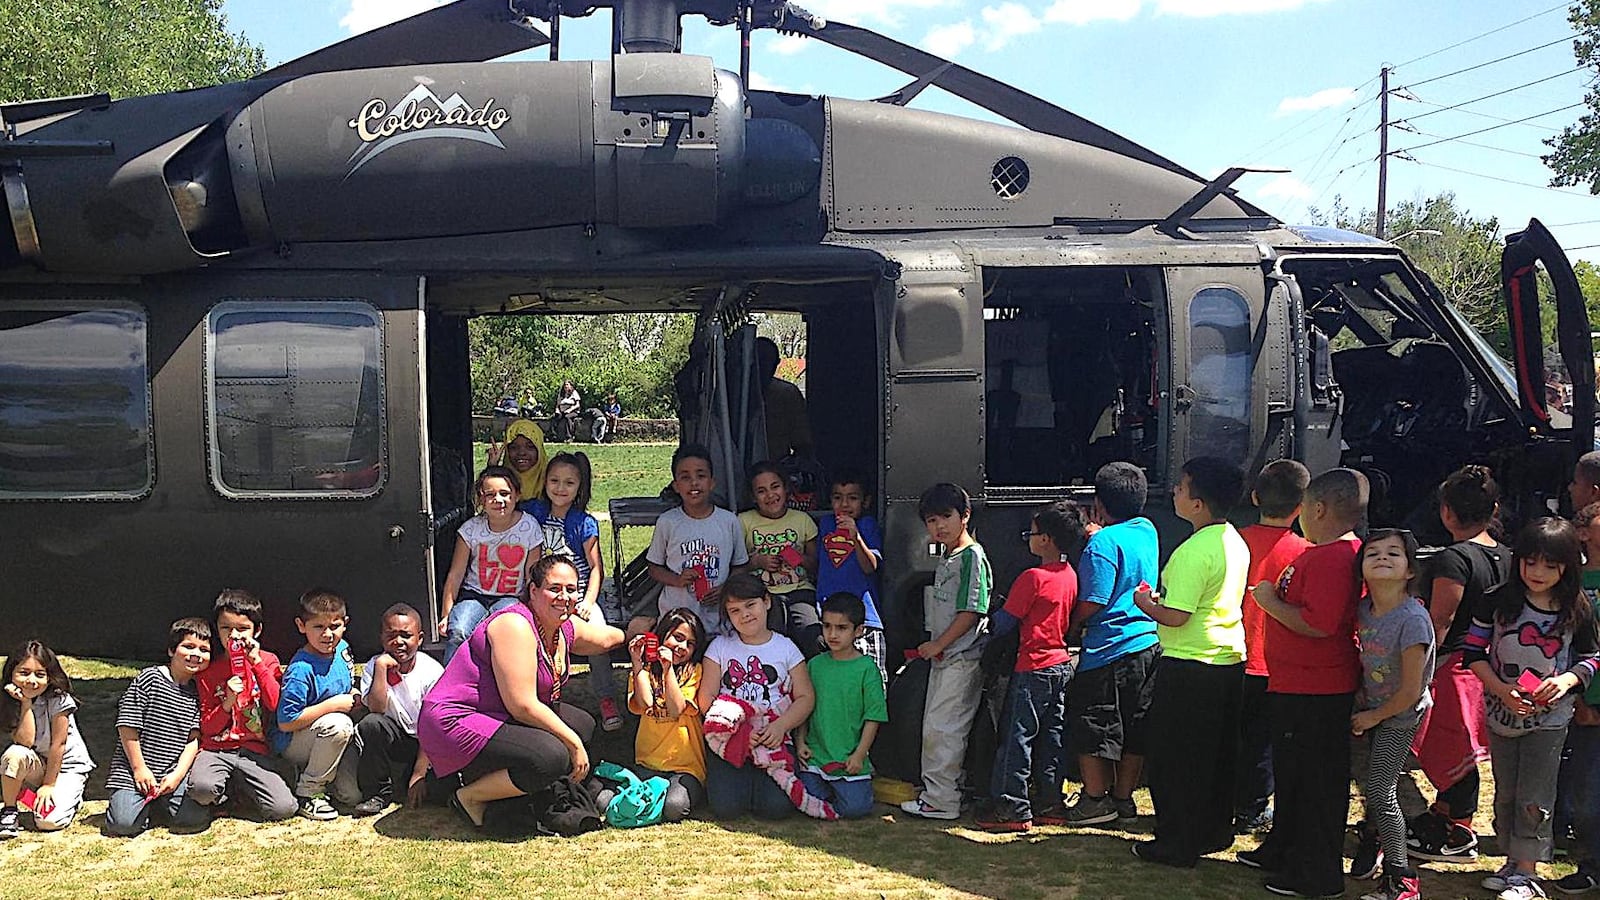 Valerie Lovato, a first grade teacher at Denver's Eagleton Elementary, poses with her students in front of a military helicopter that landed on the school's soccer field as part of the "Live Drug Free!" initiative.